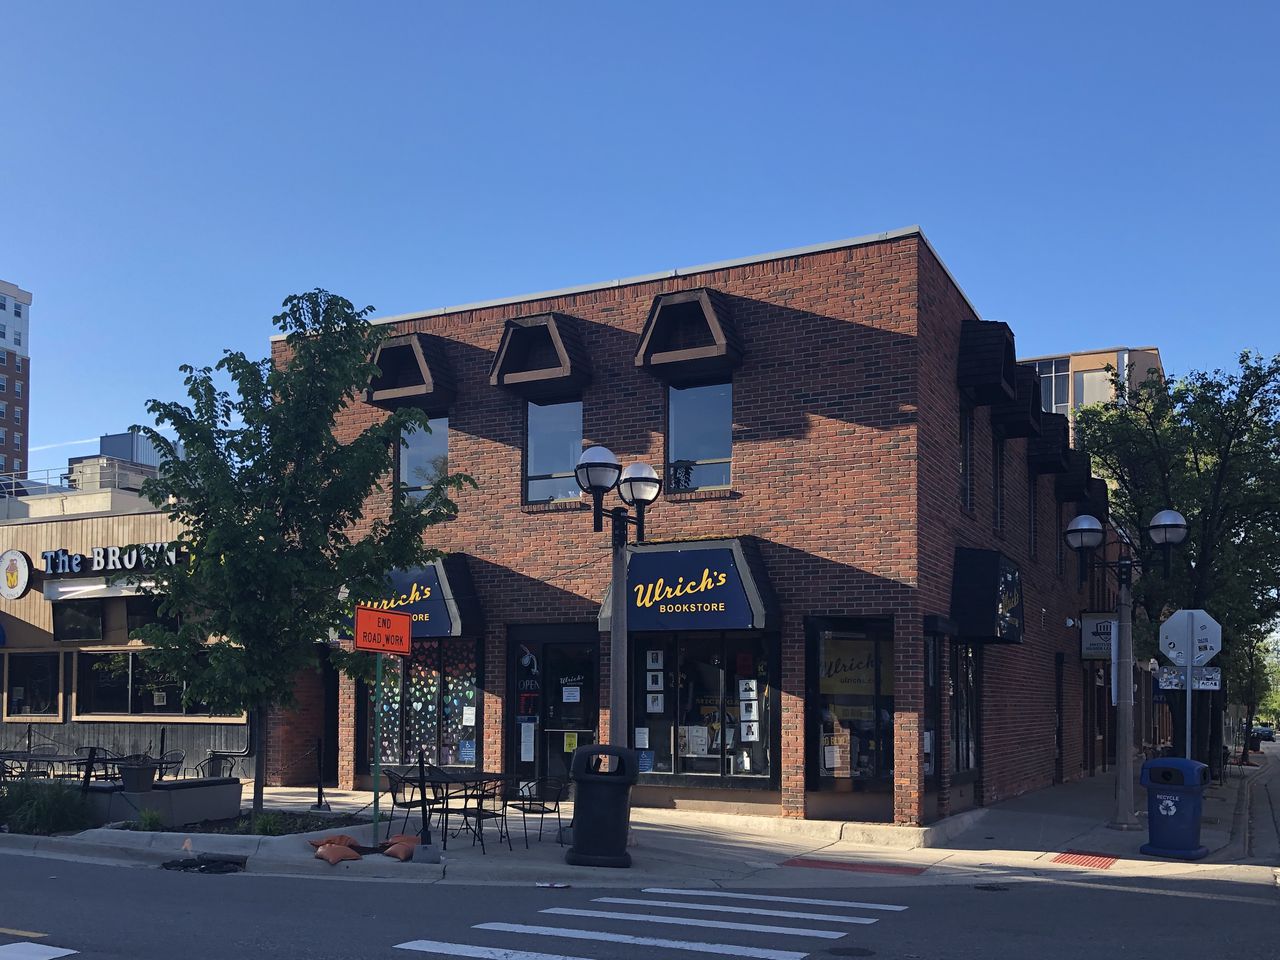 Ulrich's on South University in Ann Arbor, Michigan